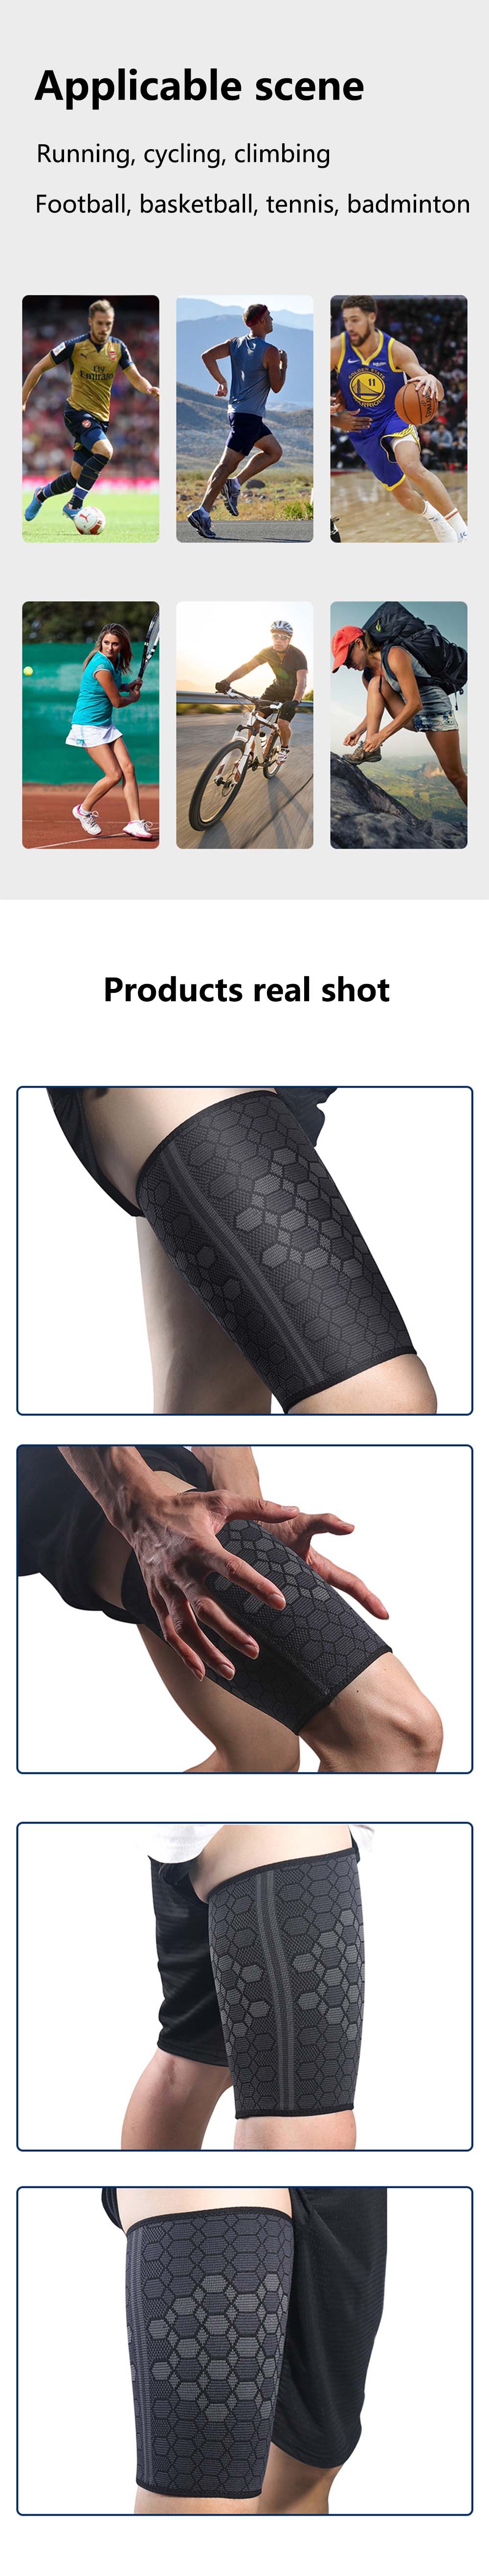 KALOAD-Thigh-Sleeves-Brace-Knitted-Compression-Leg-Sleeve-Legwarmer-Fitness-Running-Legs-Support-Pre-1928827-2